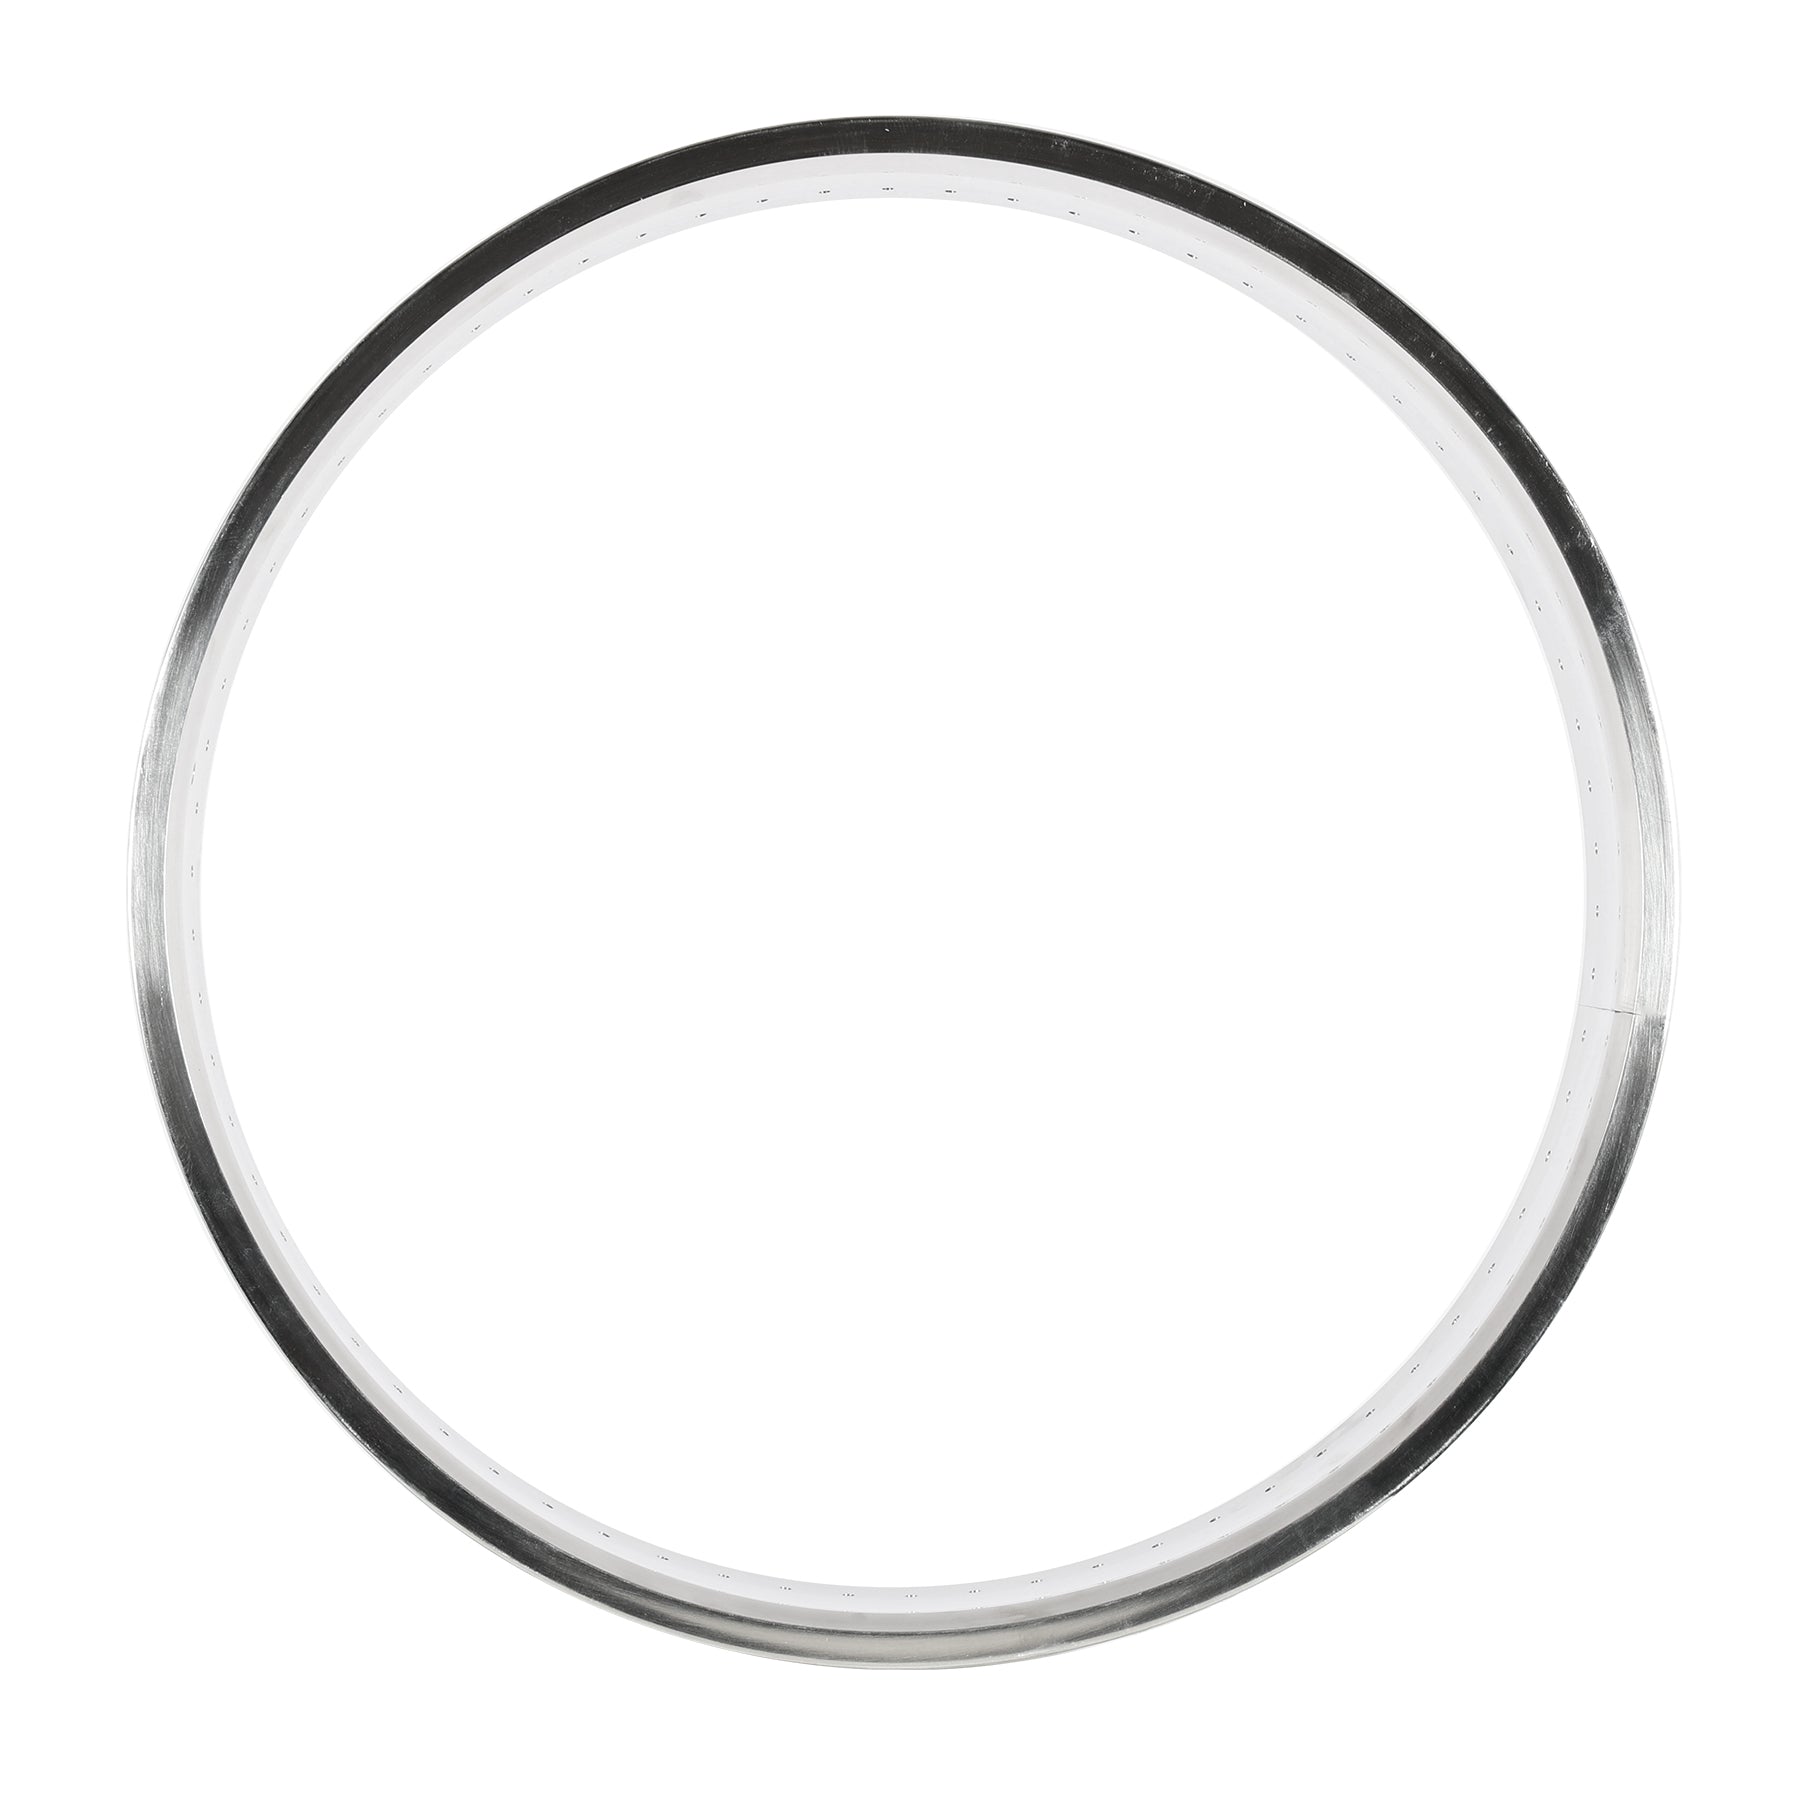 Tracer Bicycle Fat Rim 26" x 4" x 140H For Cruiser Bike